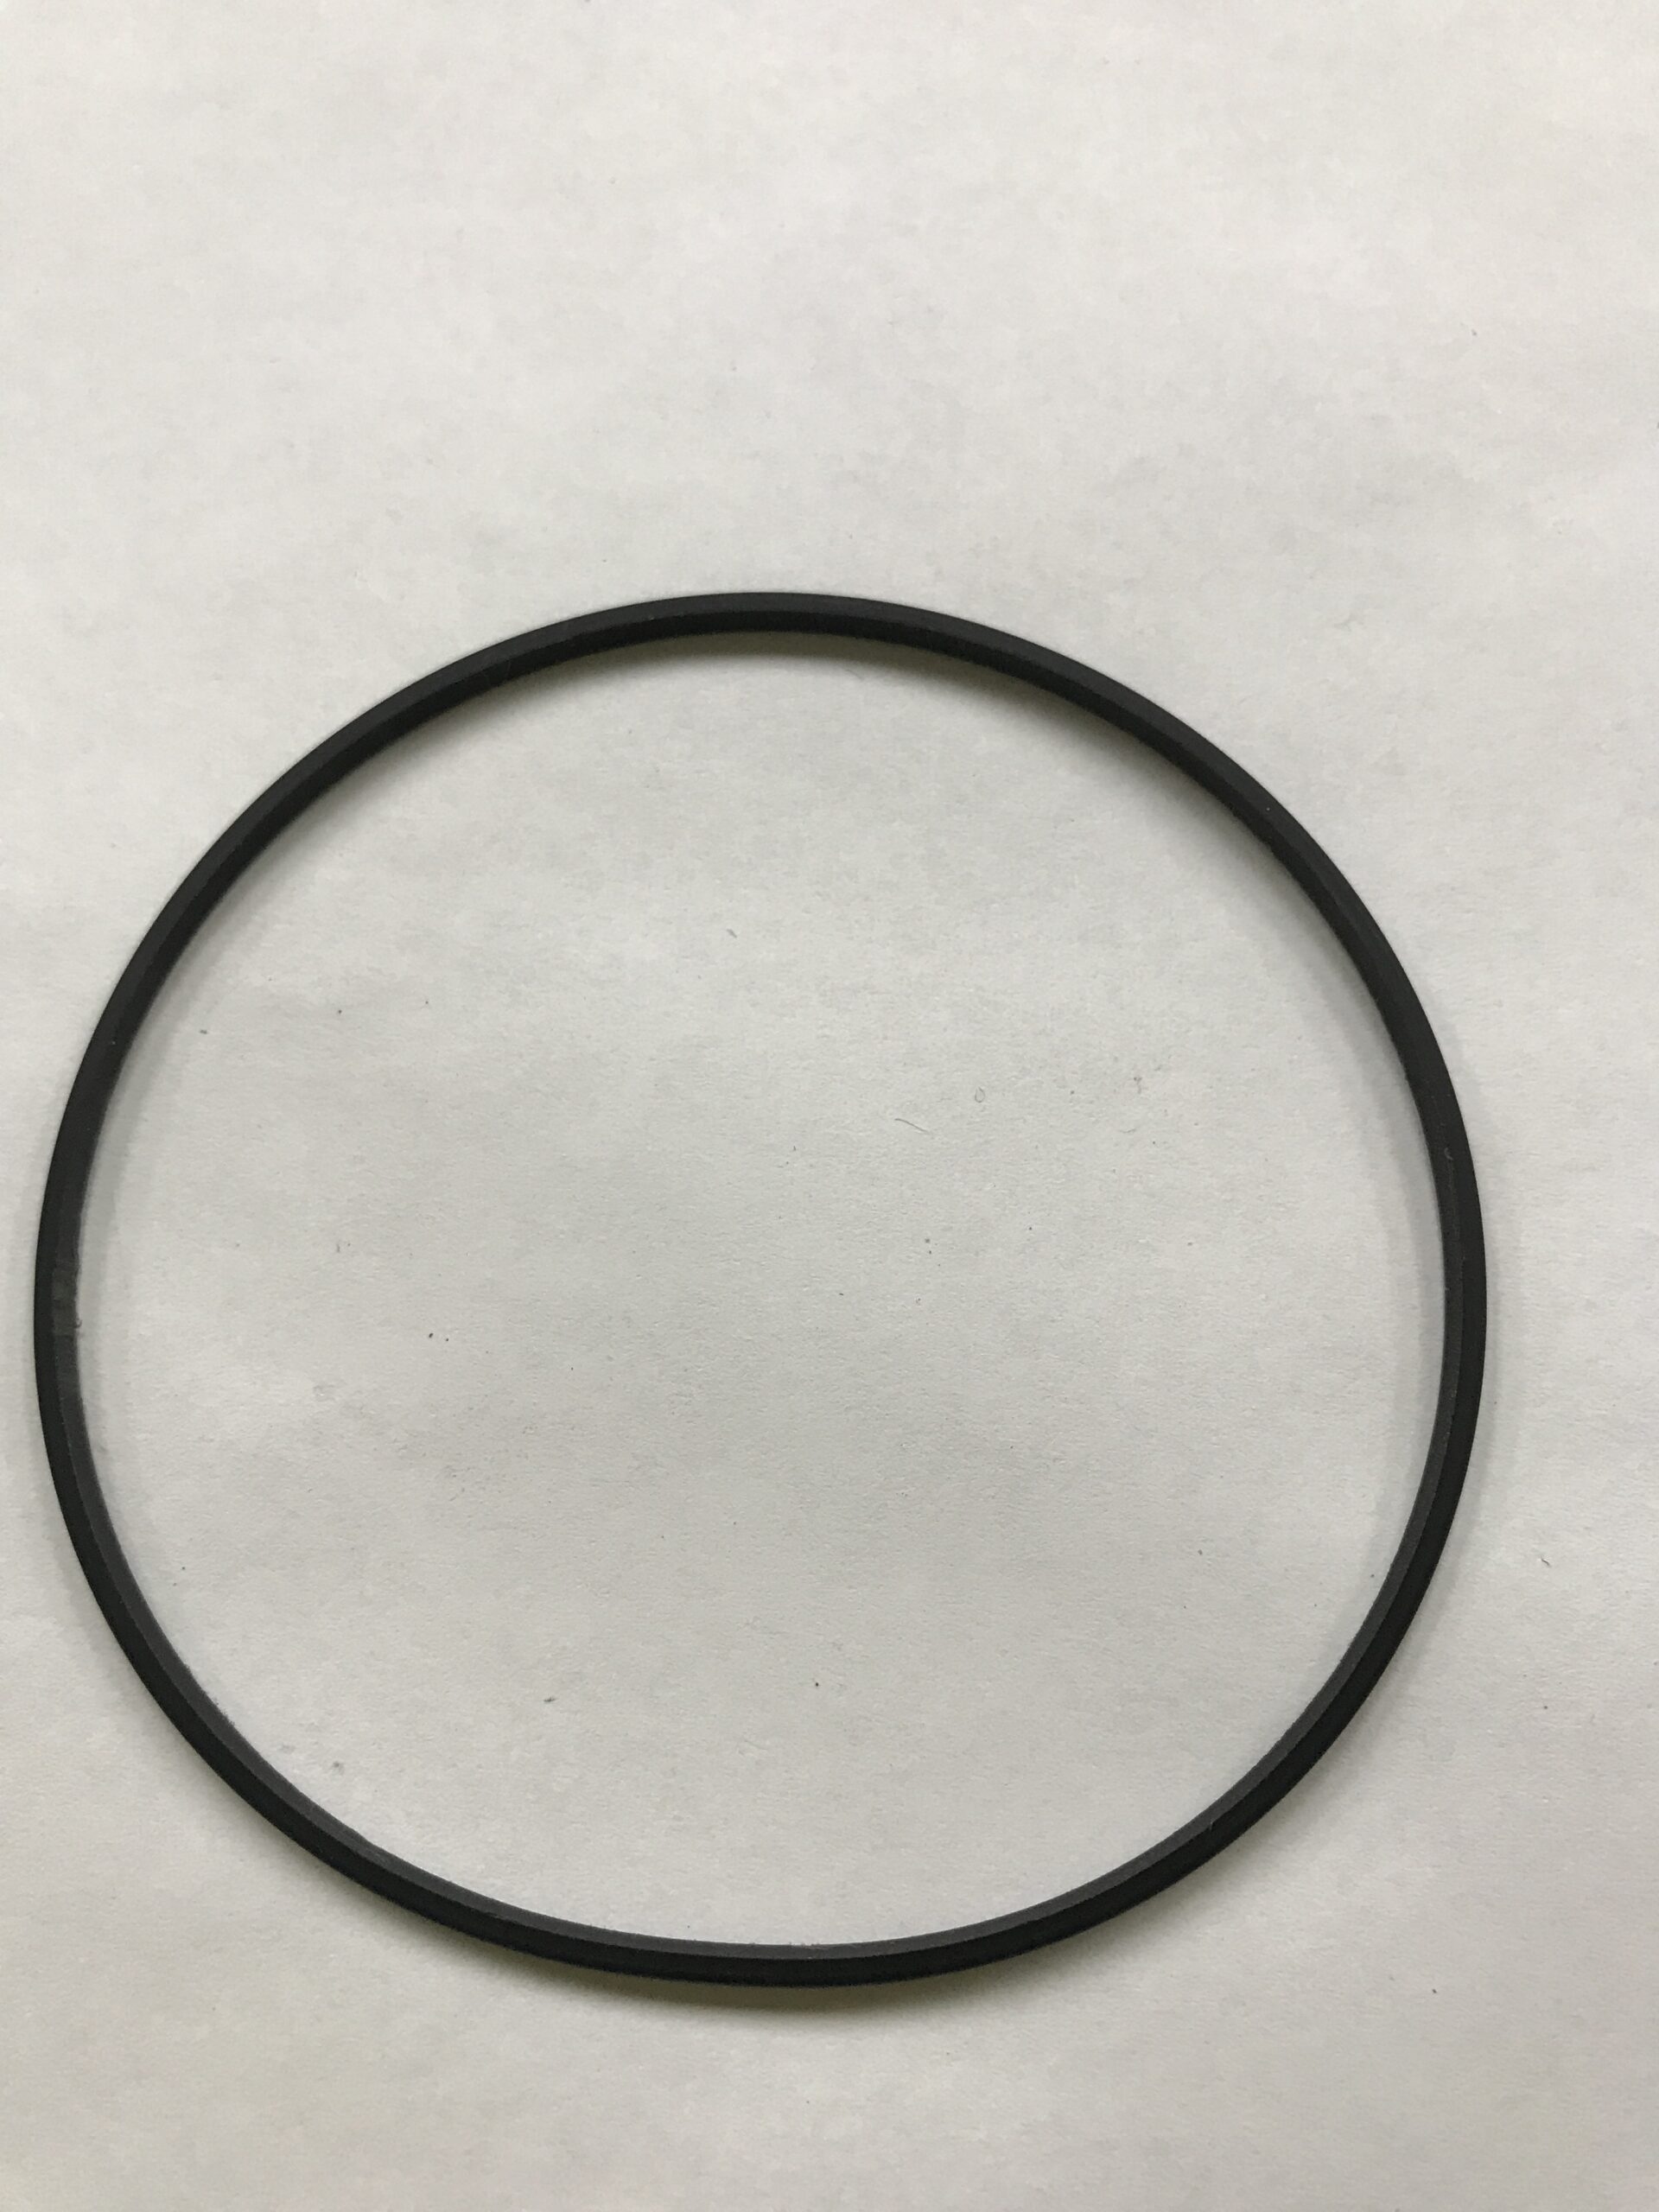 BACK-UP RING BACKING SEAL VERTICAL, ARO SELLO RESPALDO VERTICAL 80X2X2.5MM